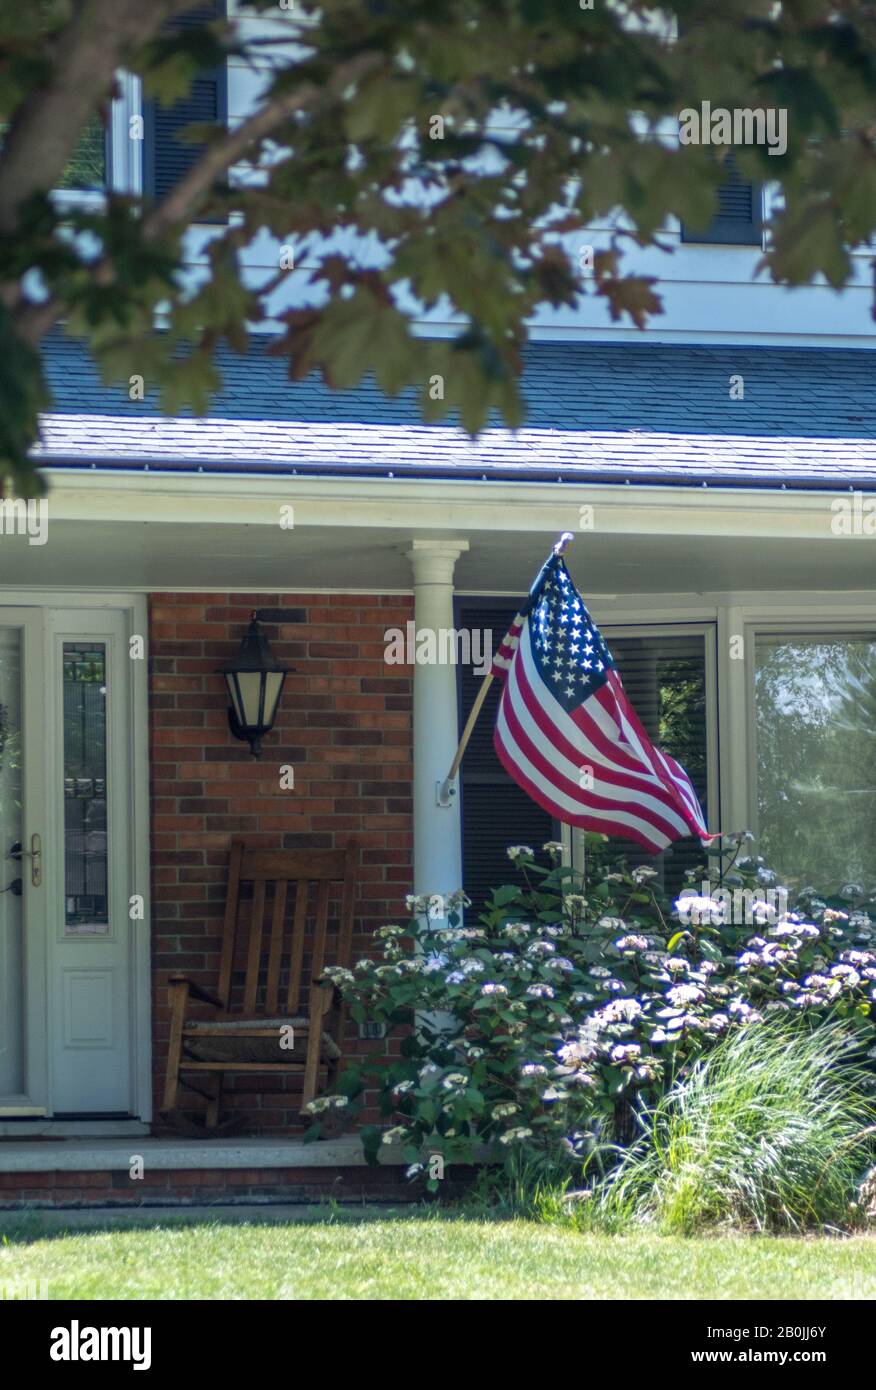 American flag blows in the breeze in this patriotic photo of a front porch in North America Stock Photo